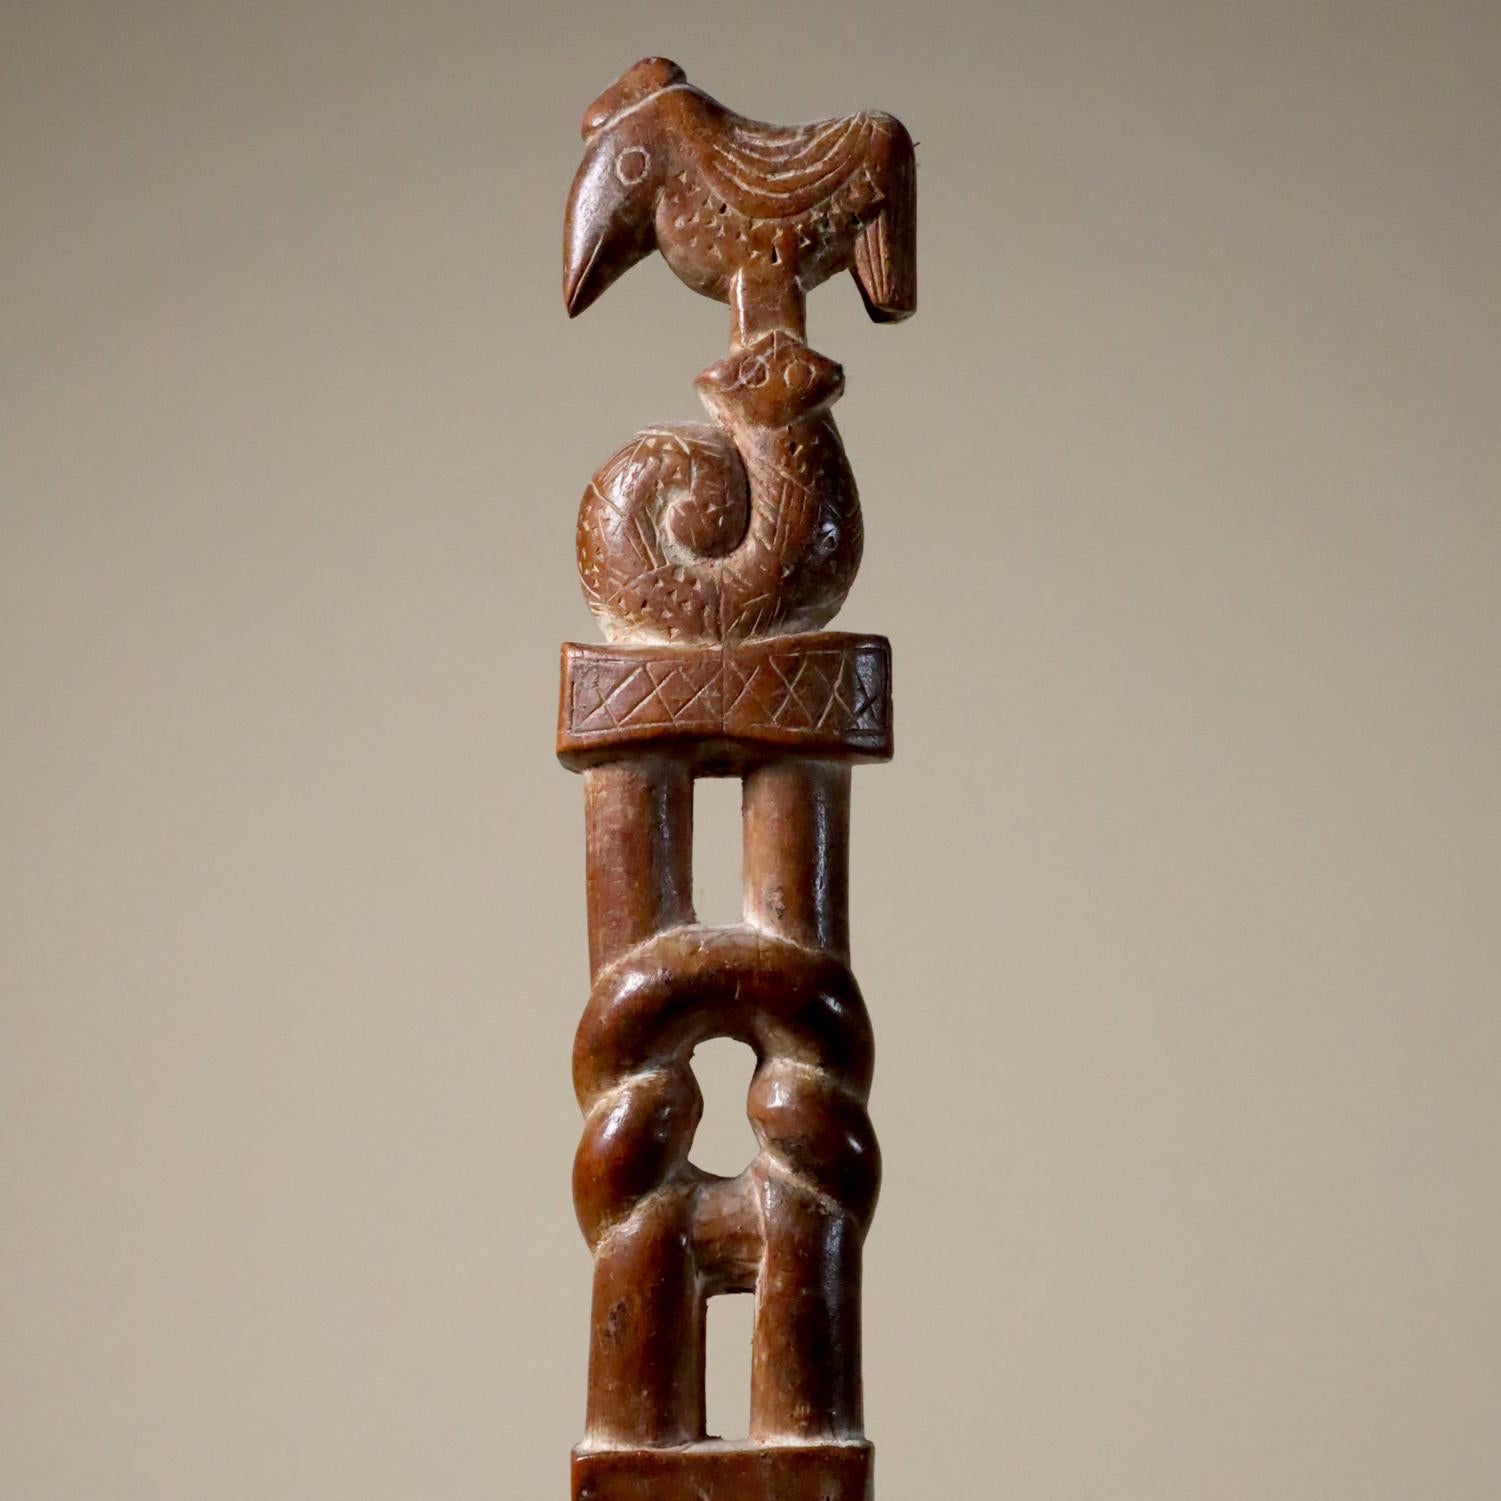 A finely carved Akan ceremonial wand or staff, Ghana, 20th century. Hardwood a lovely brown color with a high polish. White pigments are rubbed into incised lines, notches and crevices. The animals, double-blade sword, hearts, and knot are all